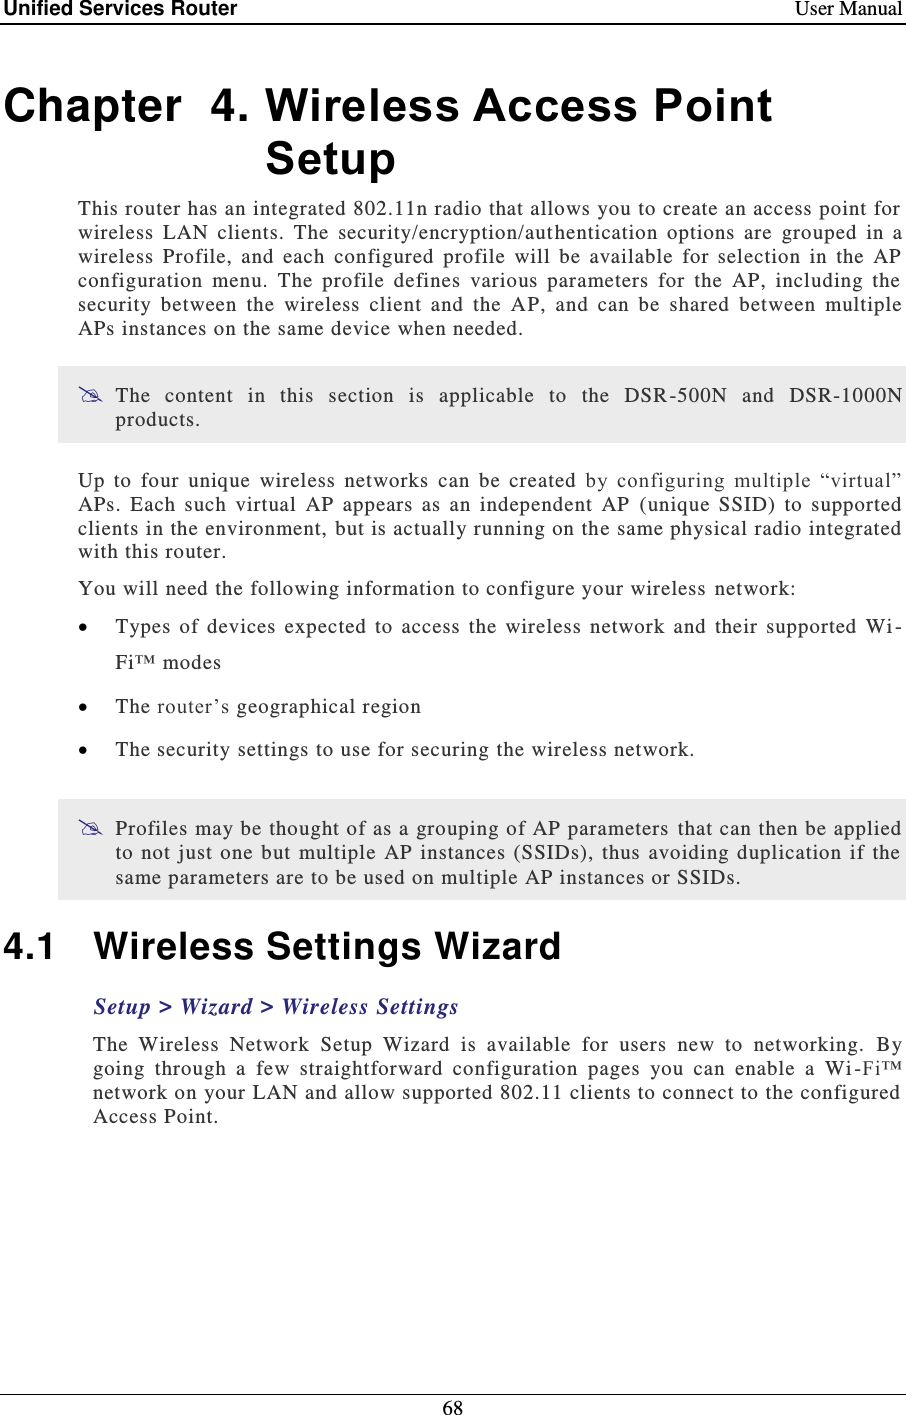 Unified Services Router    User Manual 68  Chapter  4. Wireless Access Point Setup This router has an integrated 802.11n radio that allows you to create an access point for wireless  LAN  clients.  The  security/encryption/aut hentication  options  are  grouped  in  a wireless  Profile,  and  each  configured  profile  will  be  available  for  selection  in  the  AP configuration  menu.  The  profile  defines  various  parameters  for  the  AP,  including  the security  between  the  wireless  client  and  the  AP,  and  can  be  shared  between  multiple APs instances on the same device when needed.   The  content  in  this  section  is  applicable  to  the  DSR-500N  and  DSR-1000N products.  Up  to  four  unique  wireless  networks  can  be  created  by  configuring  multiple  “virtual” APs.  Each  such  virtual  AP  appears  as  an  independent  AP  (unique  SSID)  to  supported clients in the environment, but is actually running on the same physical radio integrated with this router. You will need the following information to configure your wireless  network:   Types  of  devices  expected  to  access  the  wireless  network  and  their  supported  Wi -Fi™ modes   The router’s geographical region   The security settings to use for securing the wireless network.   Profiles may be thought of as a grouping of AP parameters  that can then be applied to  not  just  one but  multiple  AP  instances  (SSIDs),  thus  avoiding  duplication  if  the same parameters are to be used on multiple AP instances or SSIDs.  4.1  Wireless Settings Wizard Setup &gt; Wizard &gt; Wireless Settings The  Wireless  Network  Setup  Wizard  is  available  for  users  new  to  networking.  By going  through  a  few  straightforward  configuration  pages  you  can  enable  a  Wi -Fi™ network on your LAN and allow supported 802.11 clients to connect to the configured Access Point. 